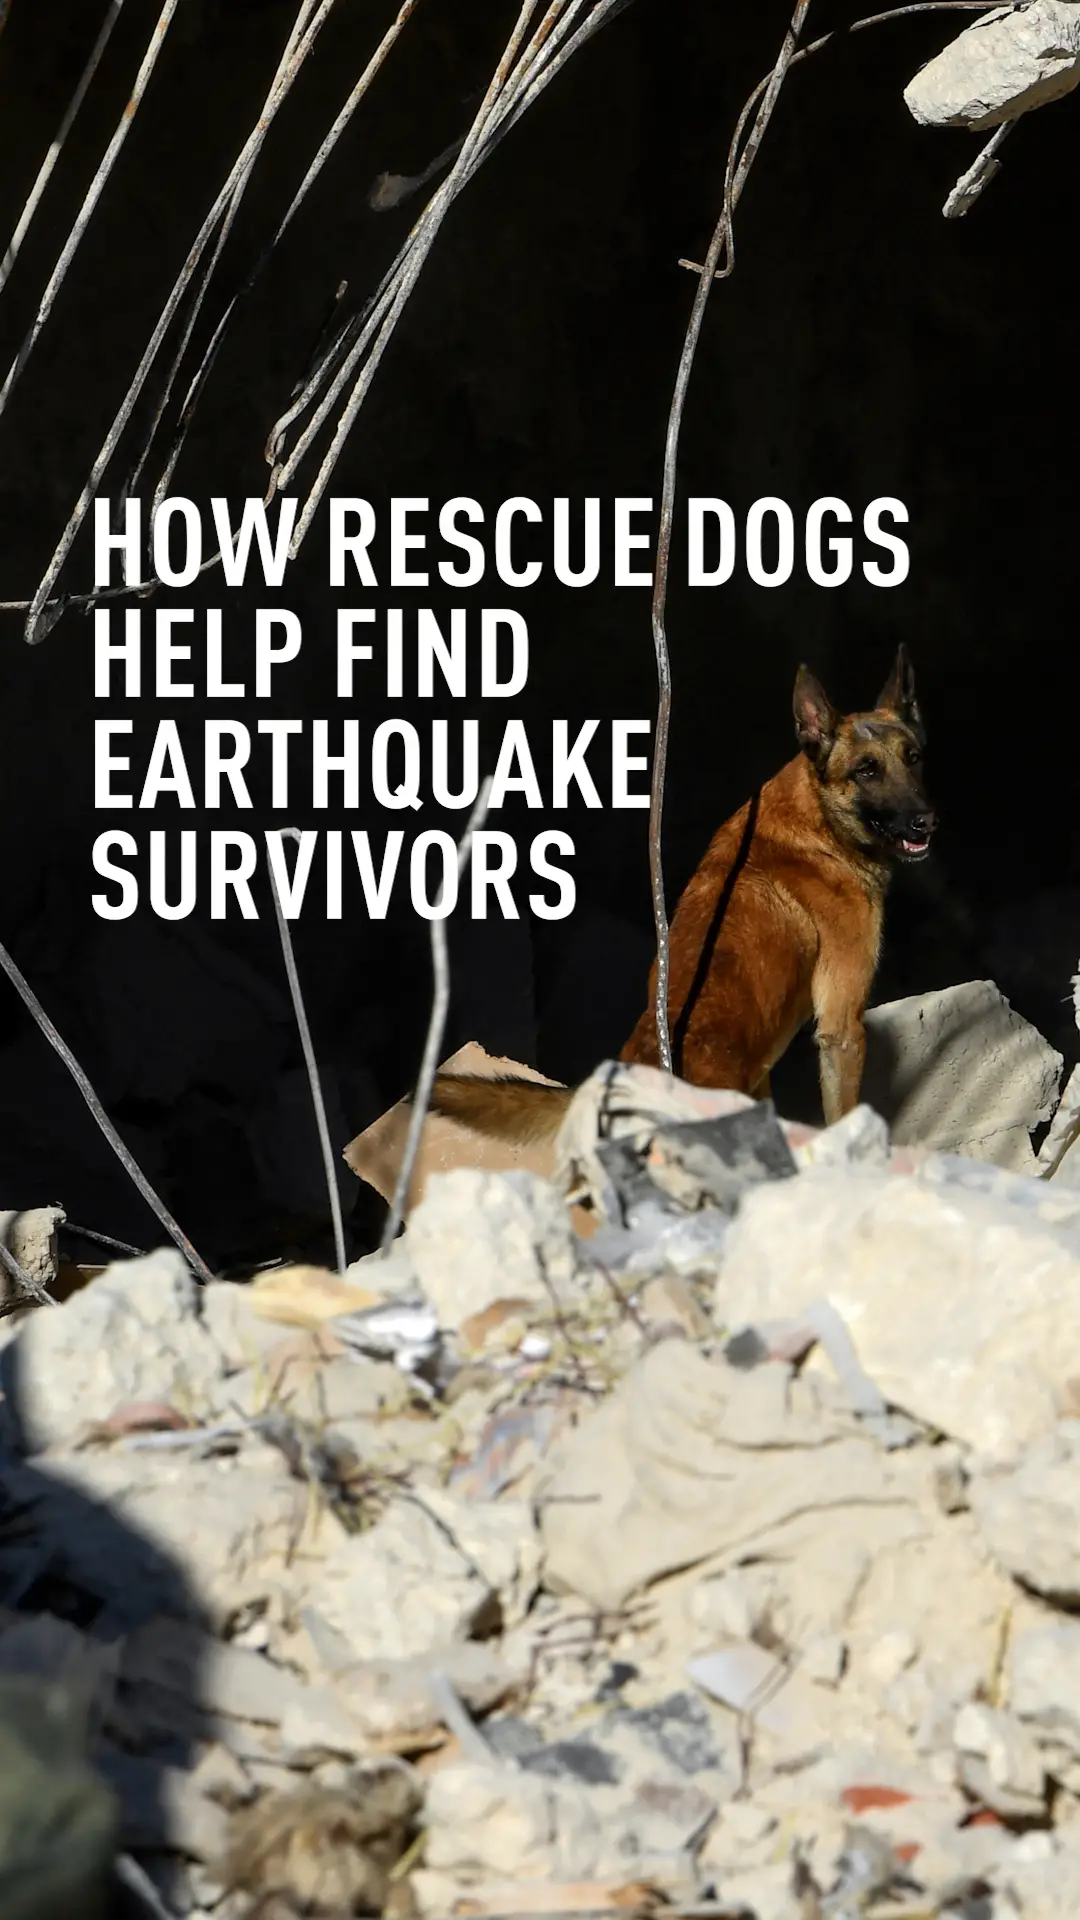 Saving Lives One Paw at a Time The IRO Rescue Dog Organization